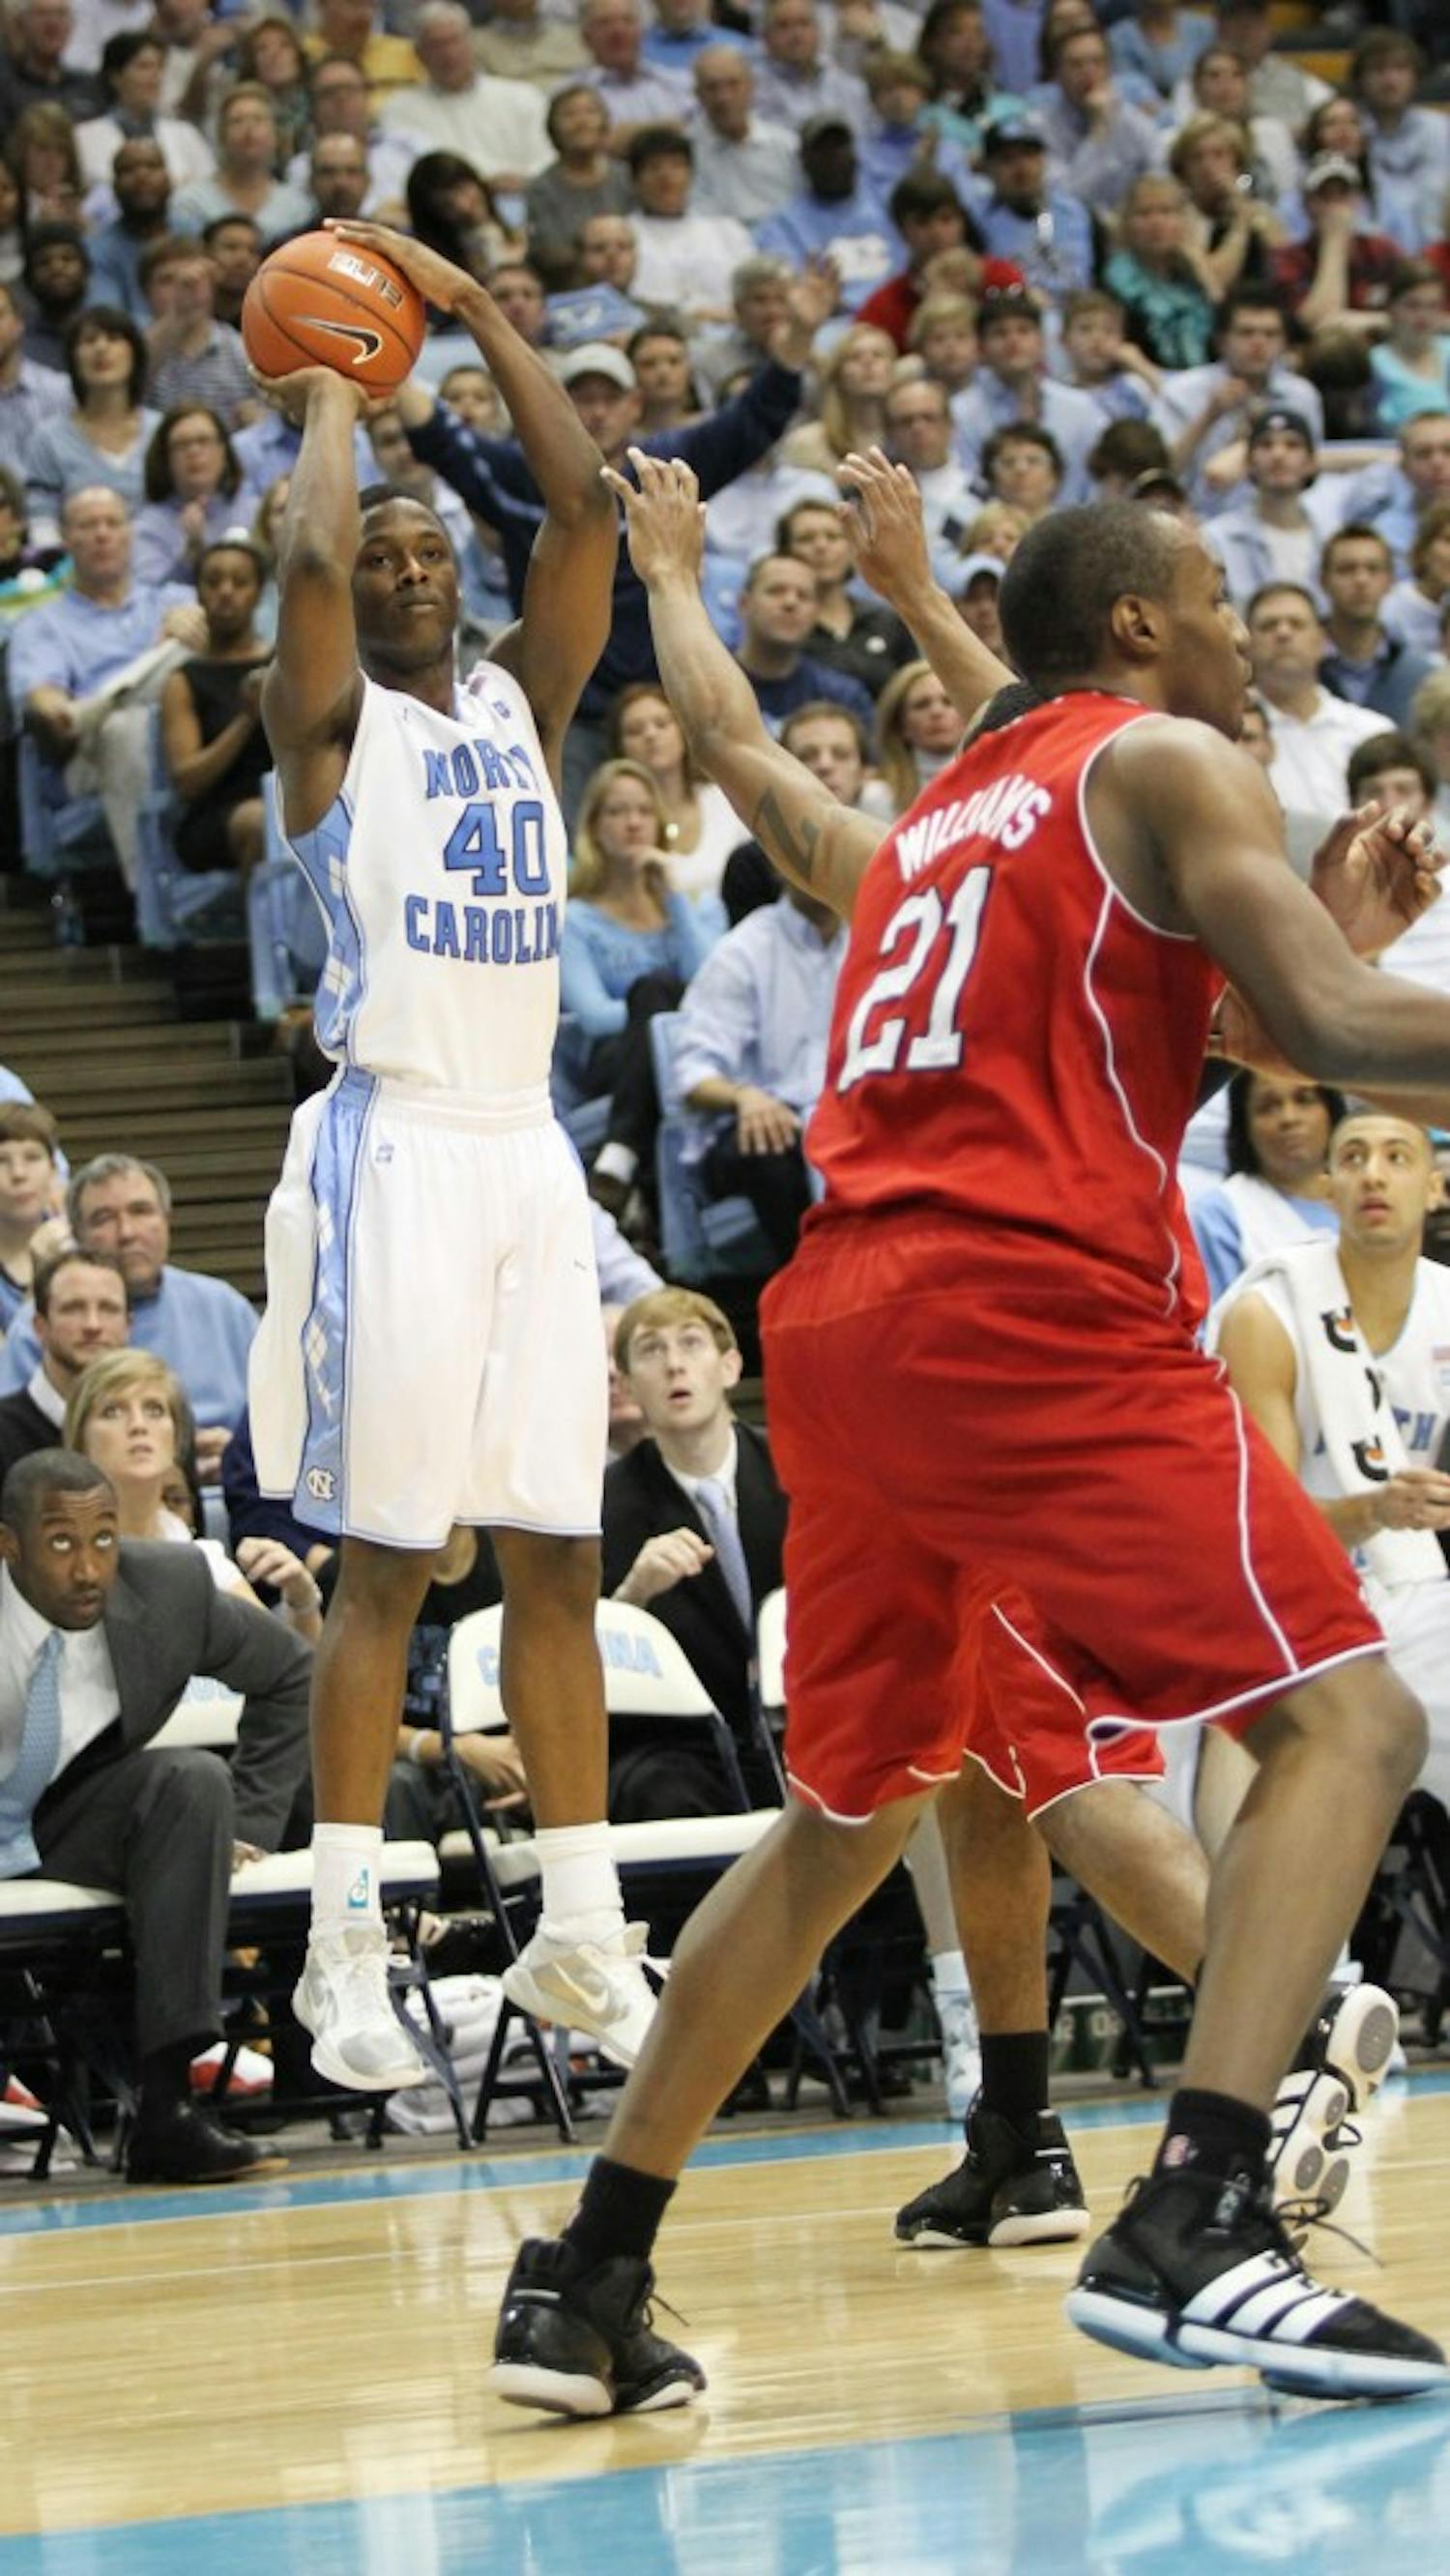 Harrison Barnes with a jump shot to expand Carolina's lead on Saturday.  